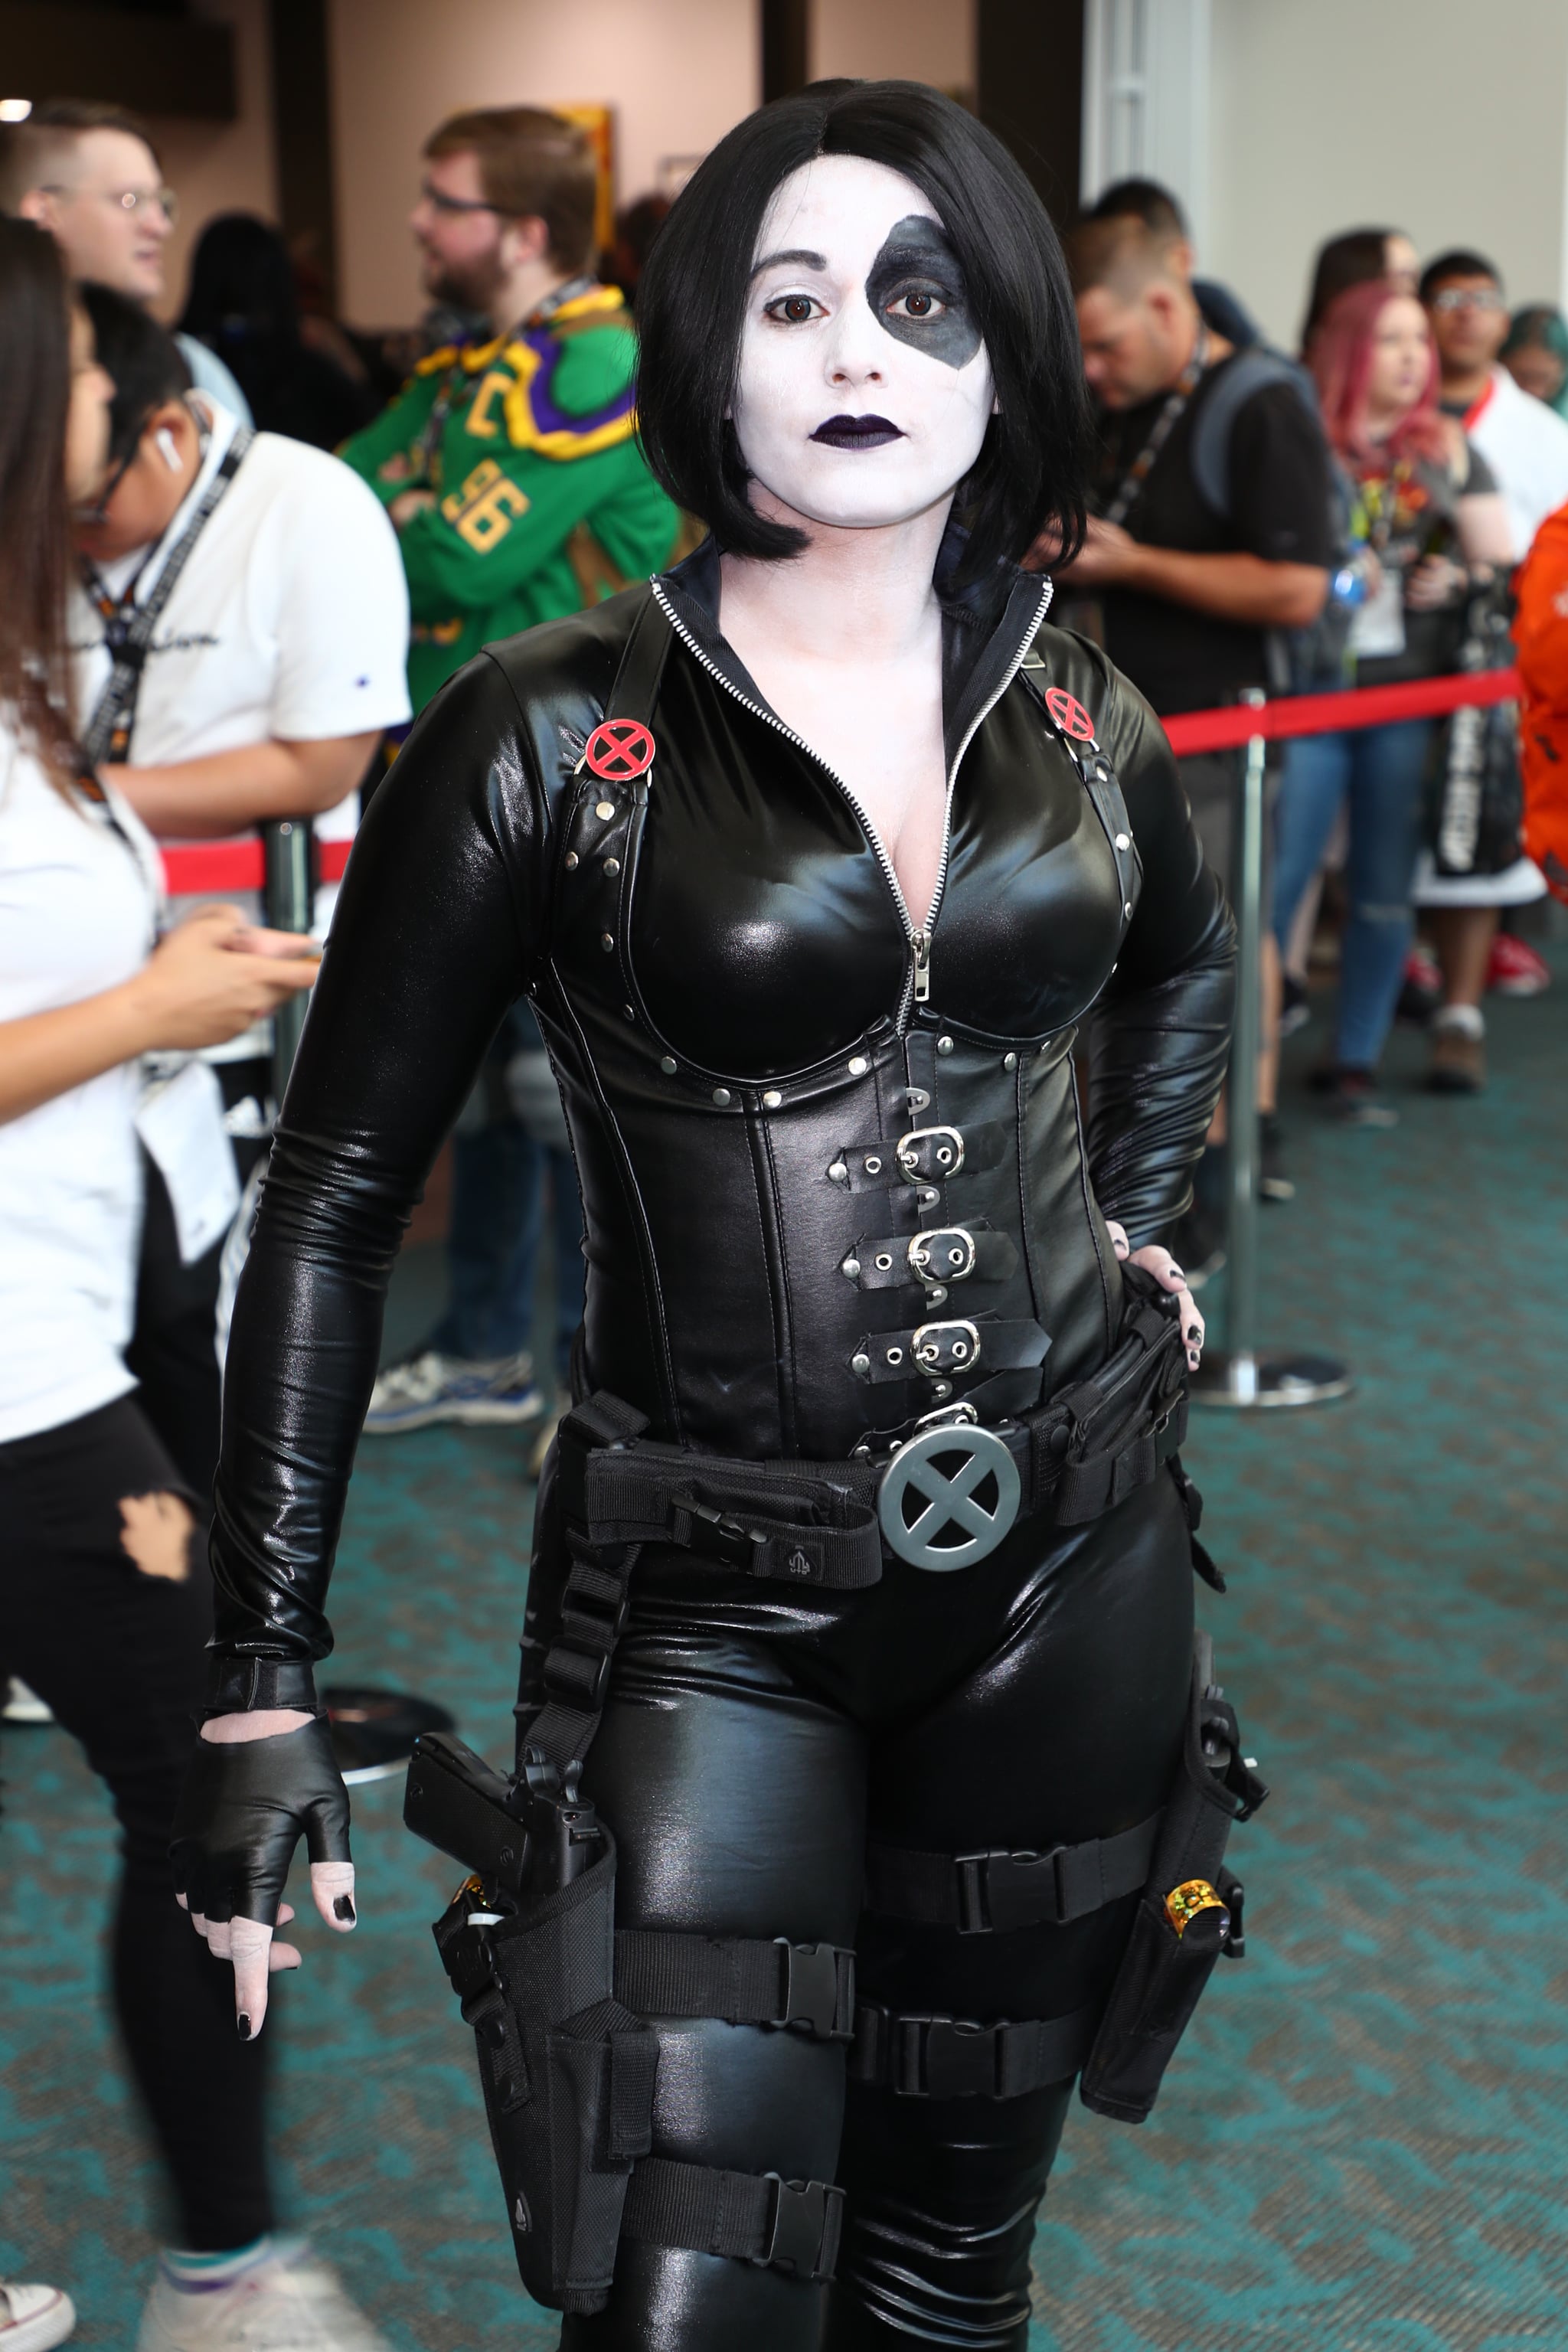 Domino From X Men 140 Photos Of The Most Creative Cosplays From San Diego Comic Con 19 Popsugar Entertainment Photo 140